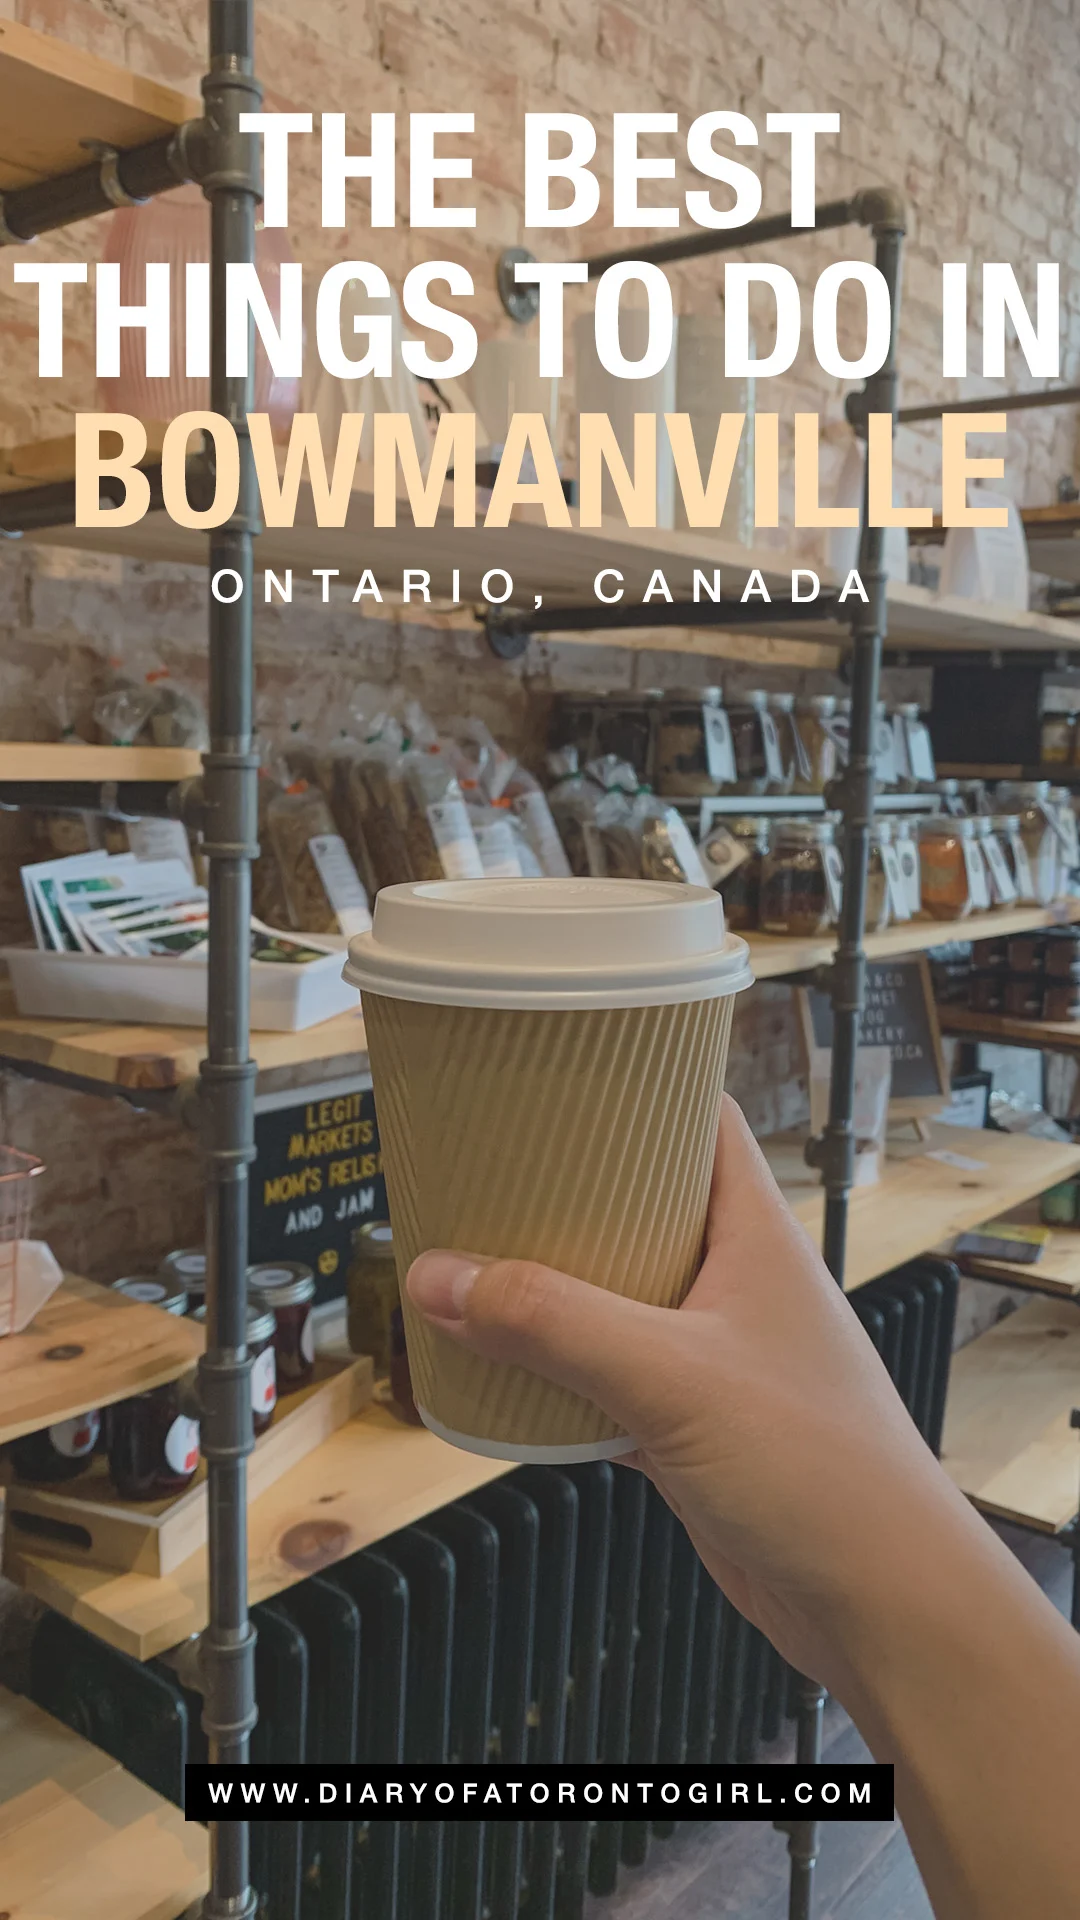 Best things to do in Bowmanville